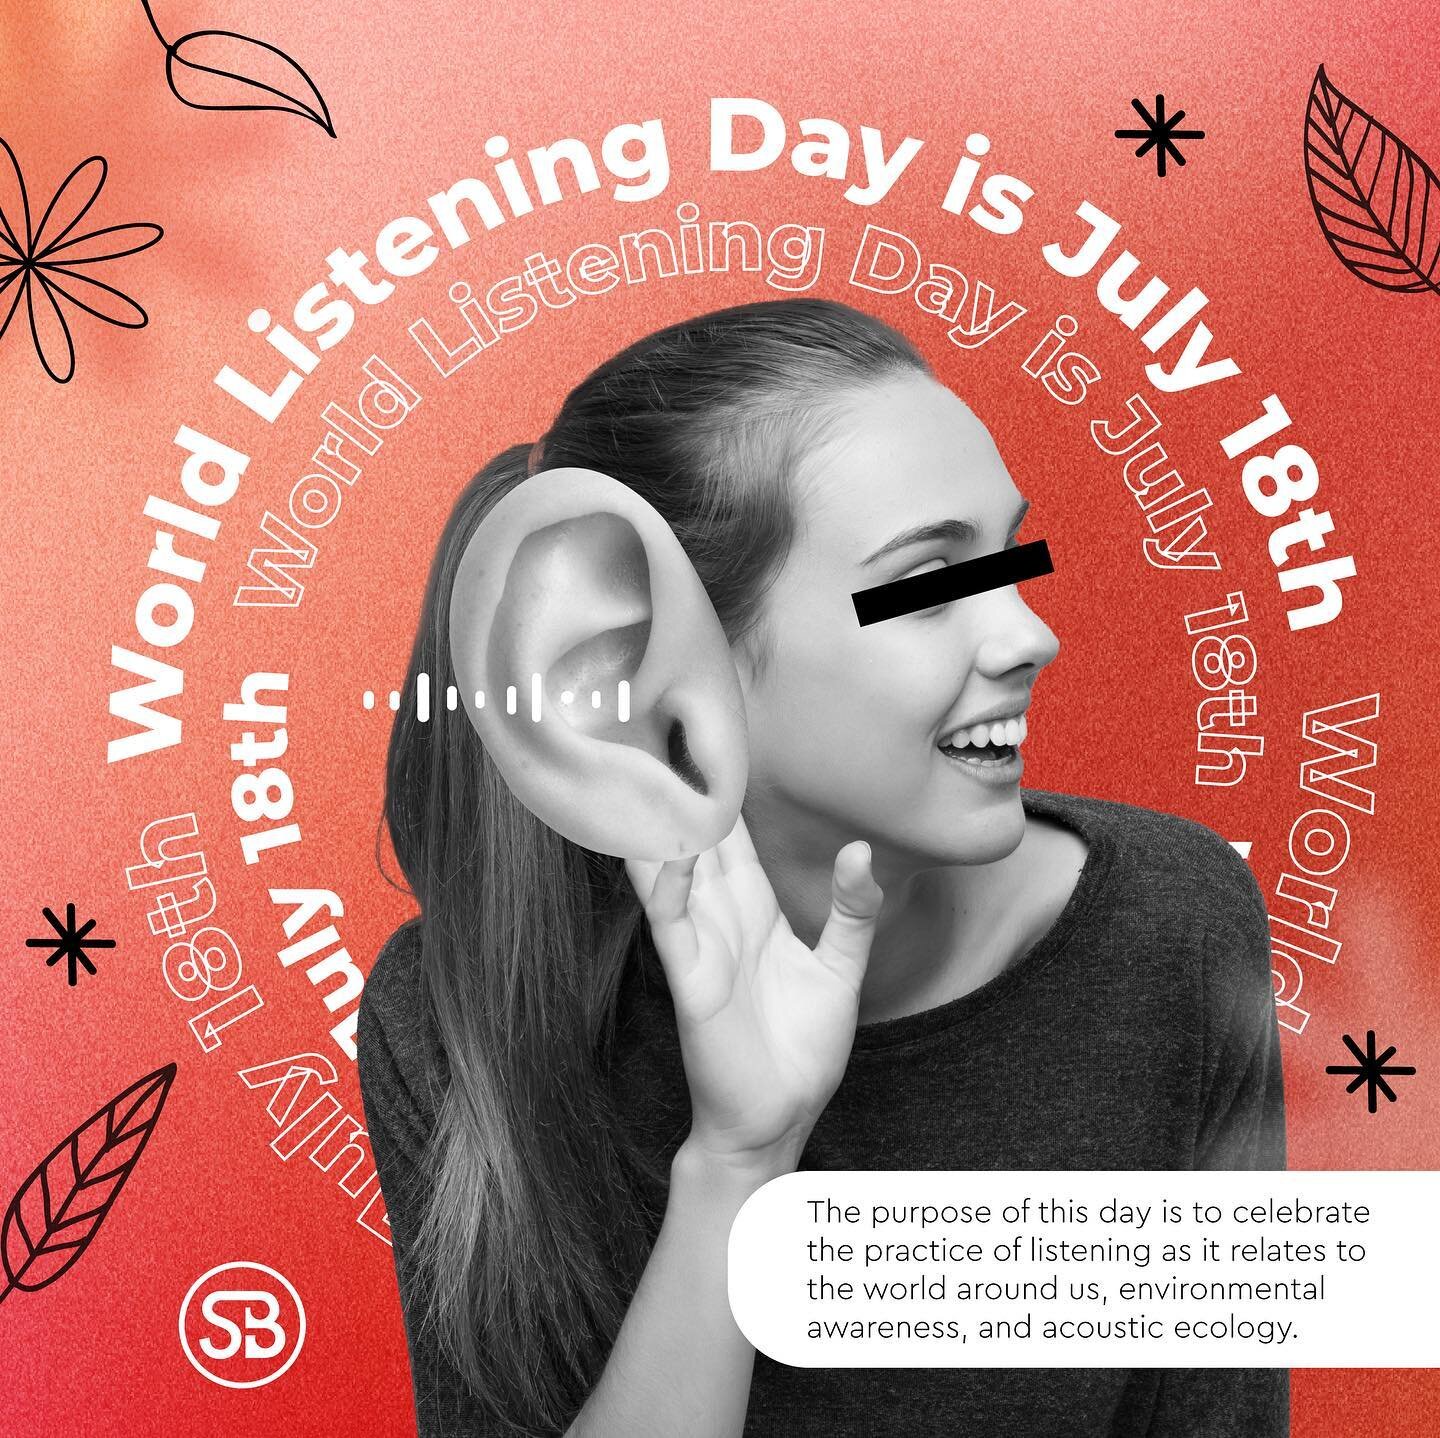 While we love music and absolutely recommend escaping into your favorite songs, yesterday was #WorldListeningDay which celebrates the sounds of the world around us.

Take some moments in your day for mindfulness and listen to the sounds in your envir